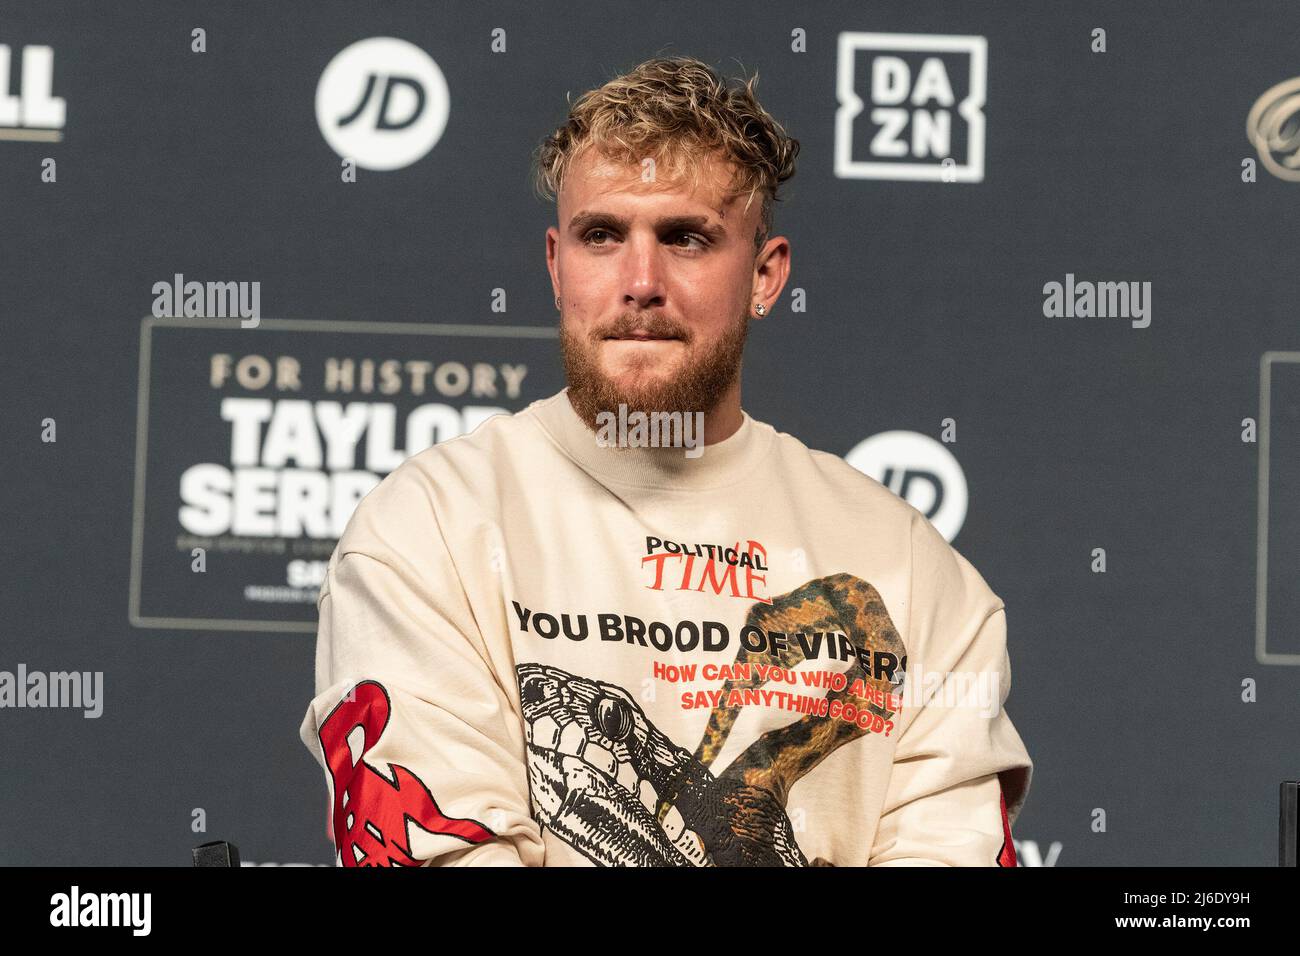 Jake Paul speaks during Weigh-in ceremony leading to Katie Taylor and Amanda Serrano fight at Hulu Theater at MSG. This will be the first women's boxing fight to headline Madison Square Garden in history. (Photo by Lev Radin/Pacific Press) Stock Photo